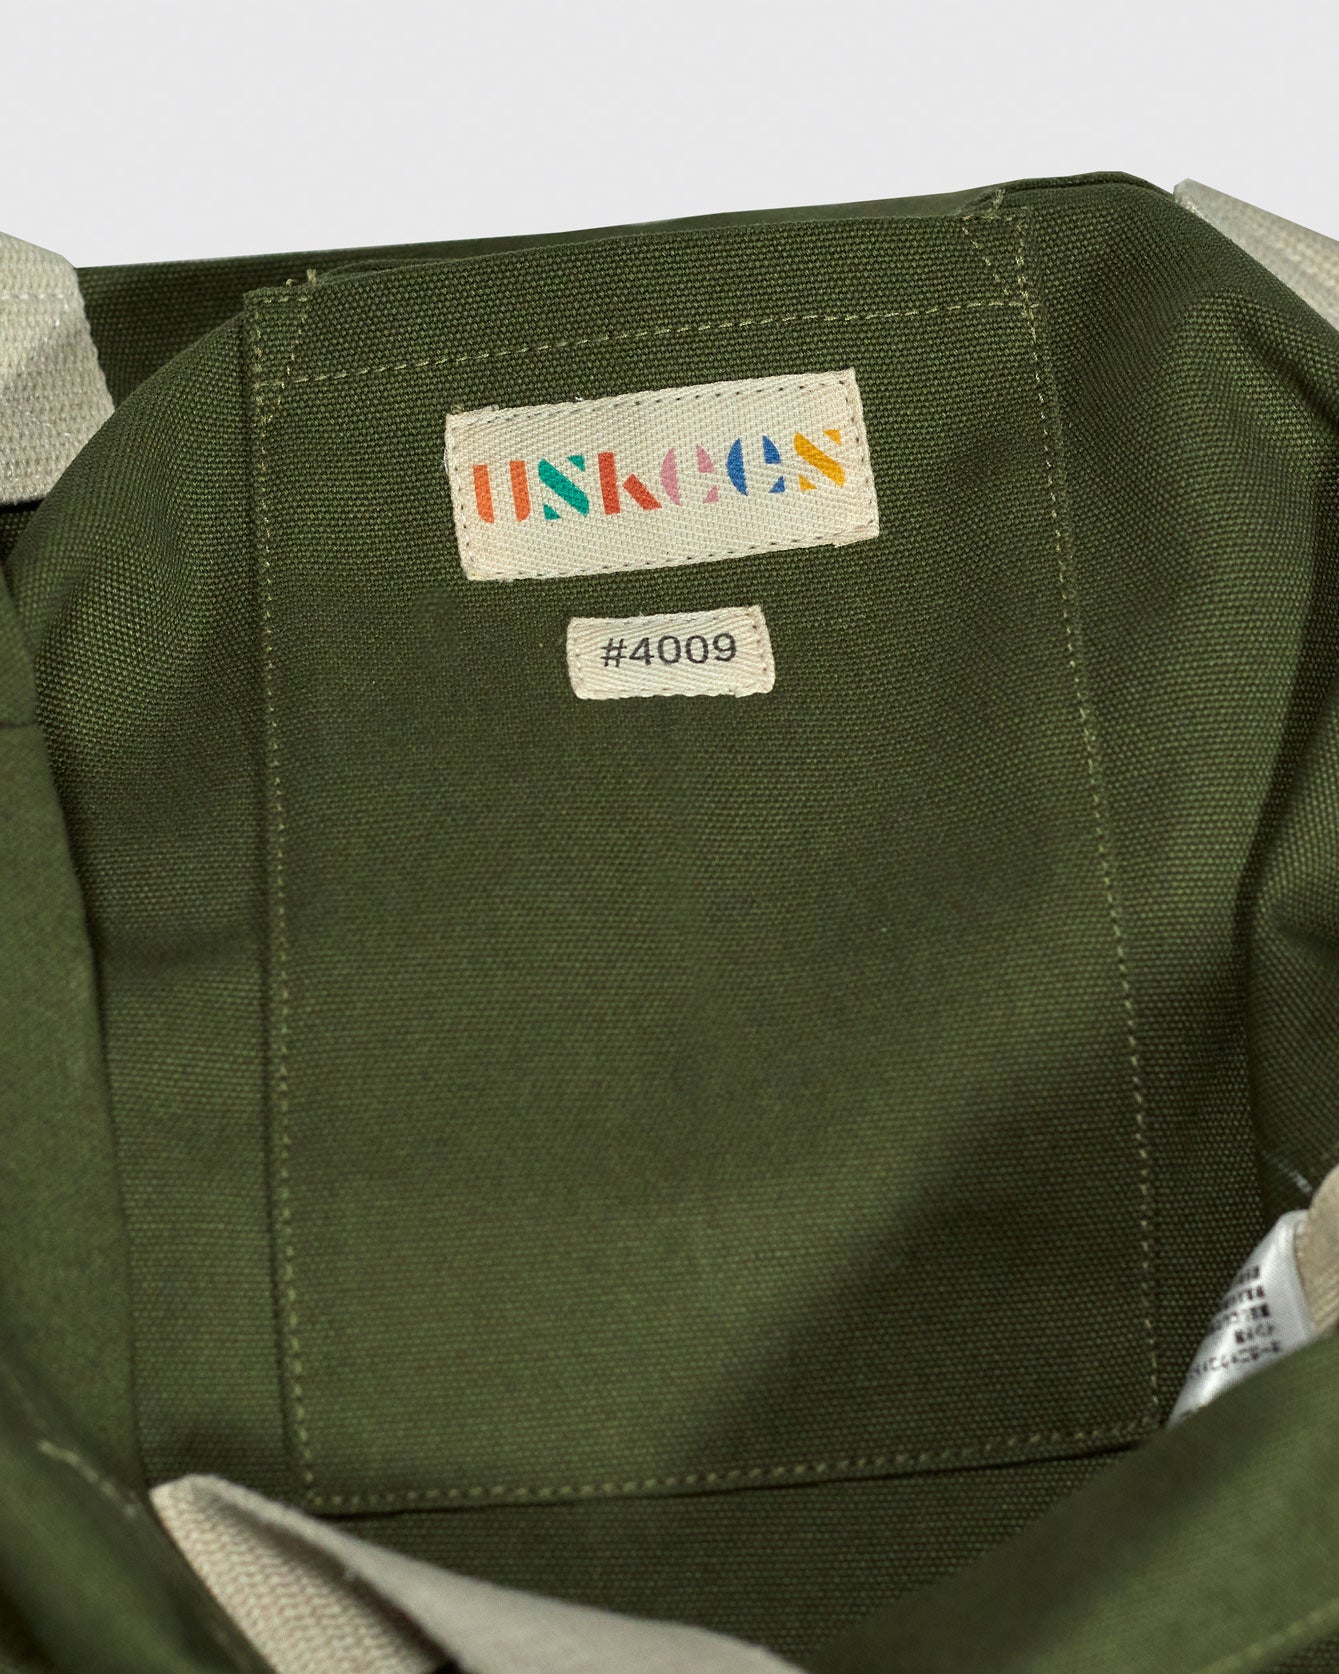 Close-up inside view of Uskees #4009 canvas tote bag in coriander-green with focus on the internal patch pocket and branding logo.